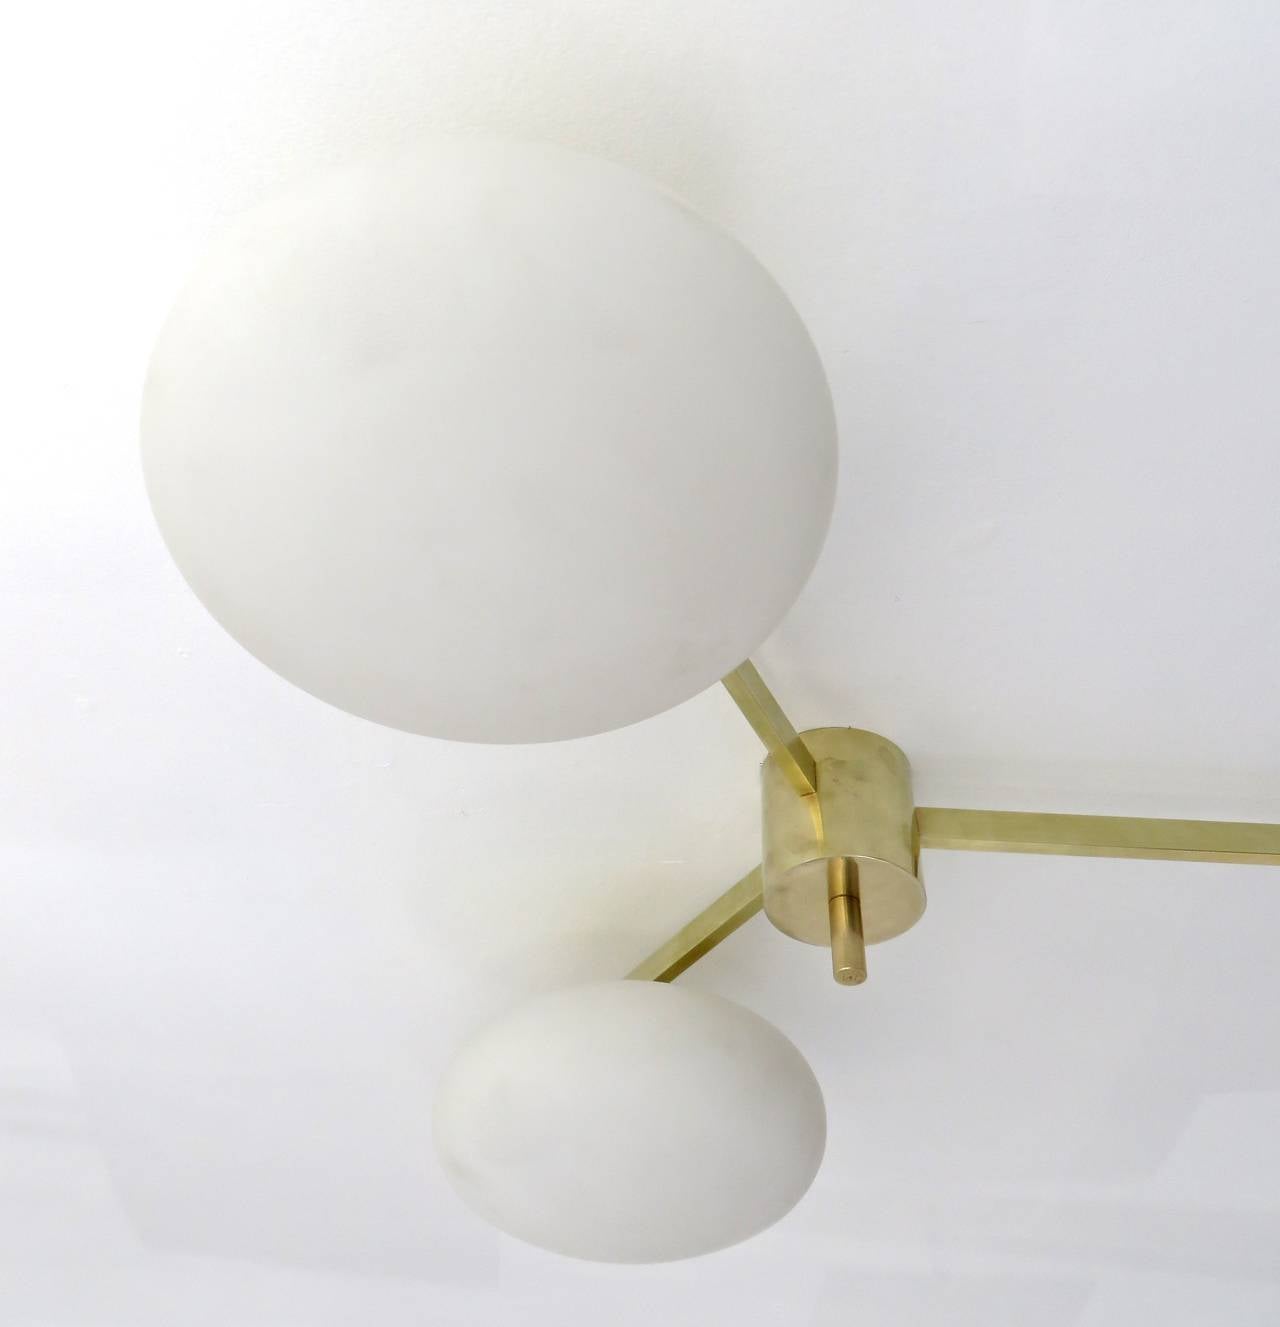 Angelo Lelli three-arm ceiling light or wall light or sconce for Arredoluce, Italy, circa 1950. Two available 
Original patina. Signed with makers mark to finial.
Brass with opaque glass shades. Shown in detail shot with original sockets. 
Now